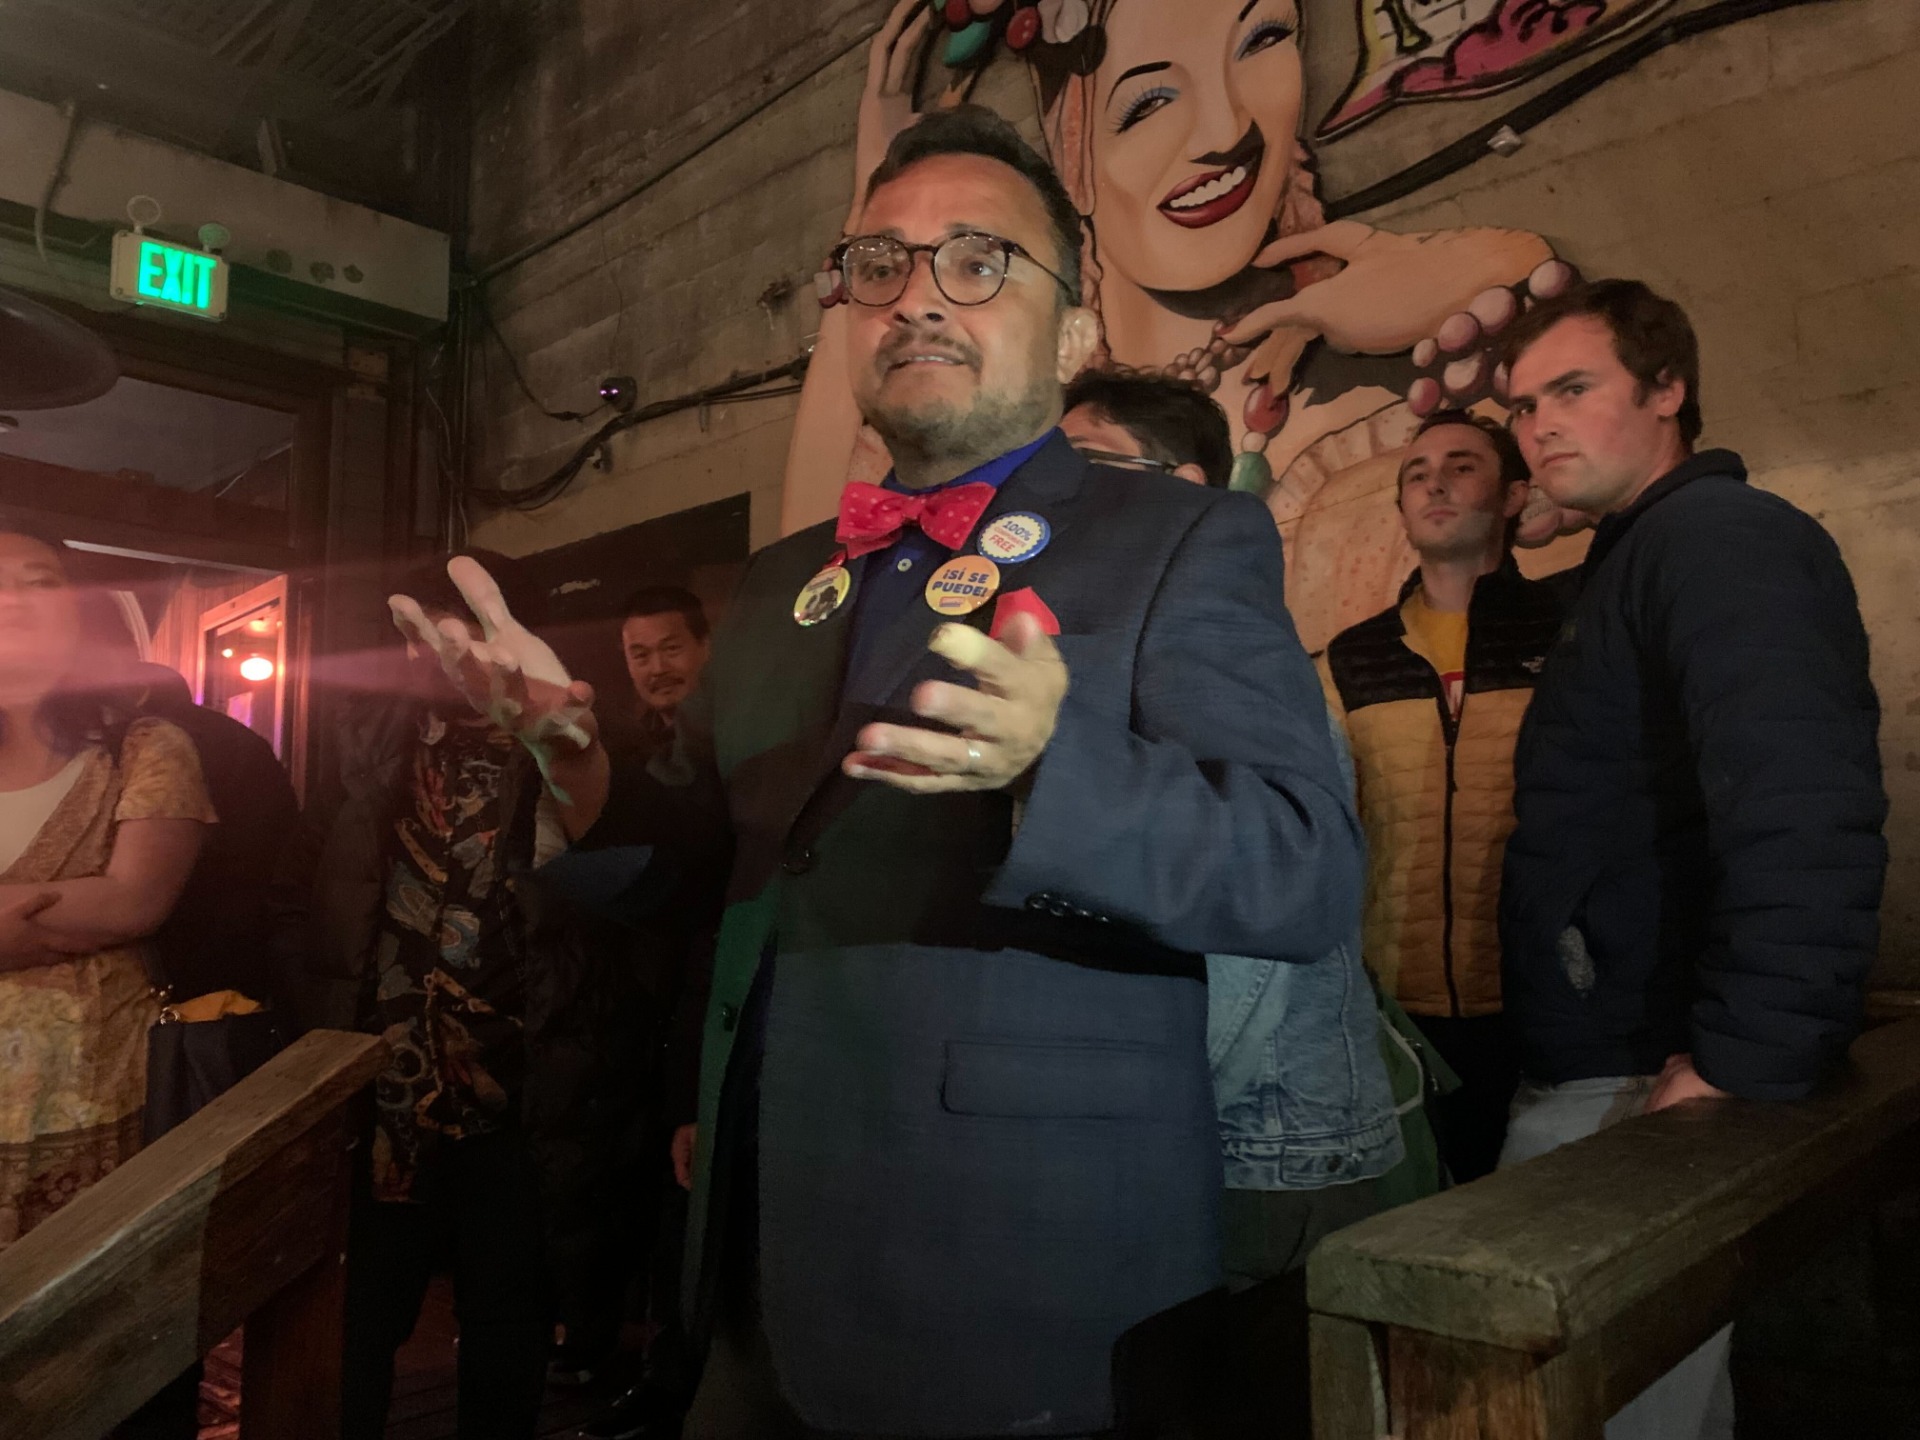 David Campos as seen from the waist up, hands outstretched, in a suit, speaking to supporters in front of a mural in a bar.